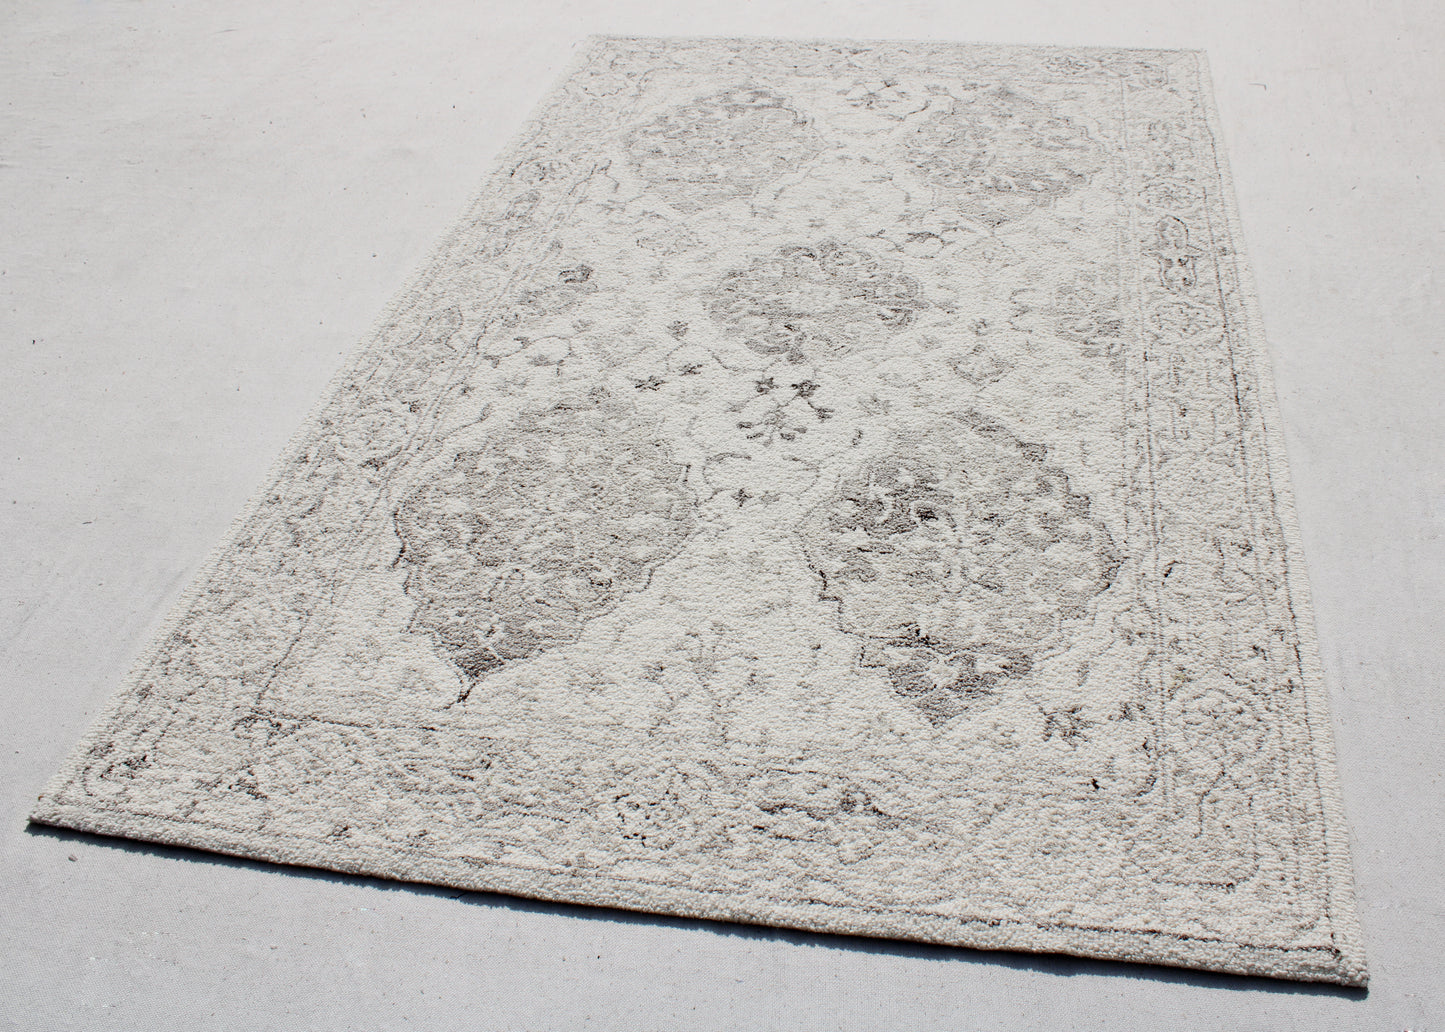 Dynamic Rugs LEGEND 7487 Ivory/Natural Area Rug